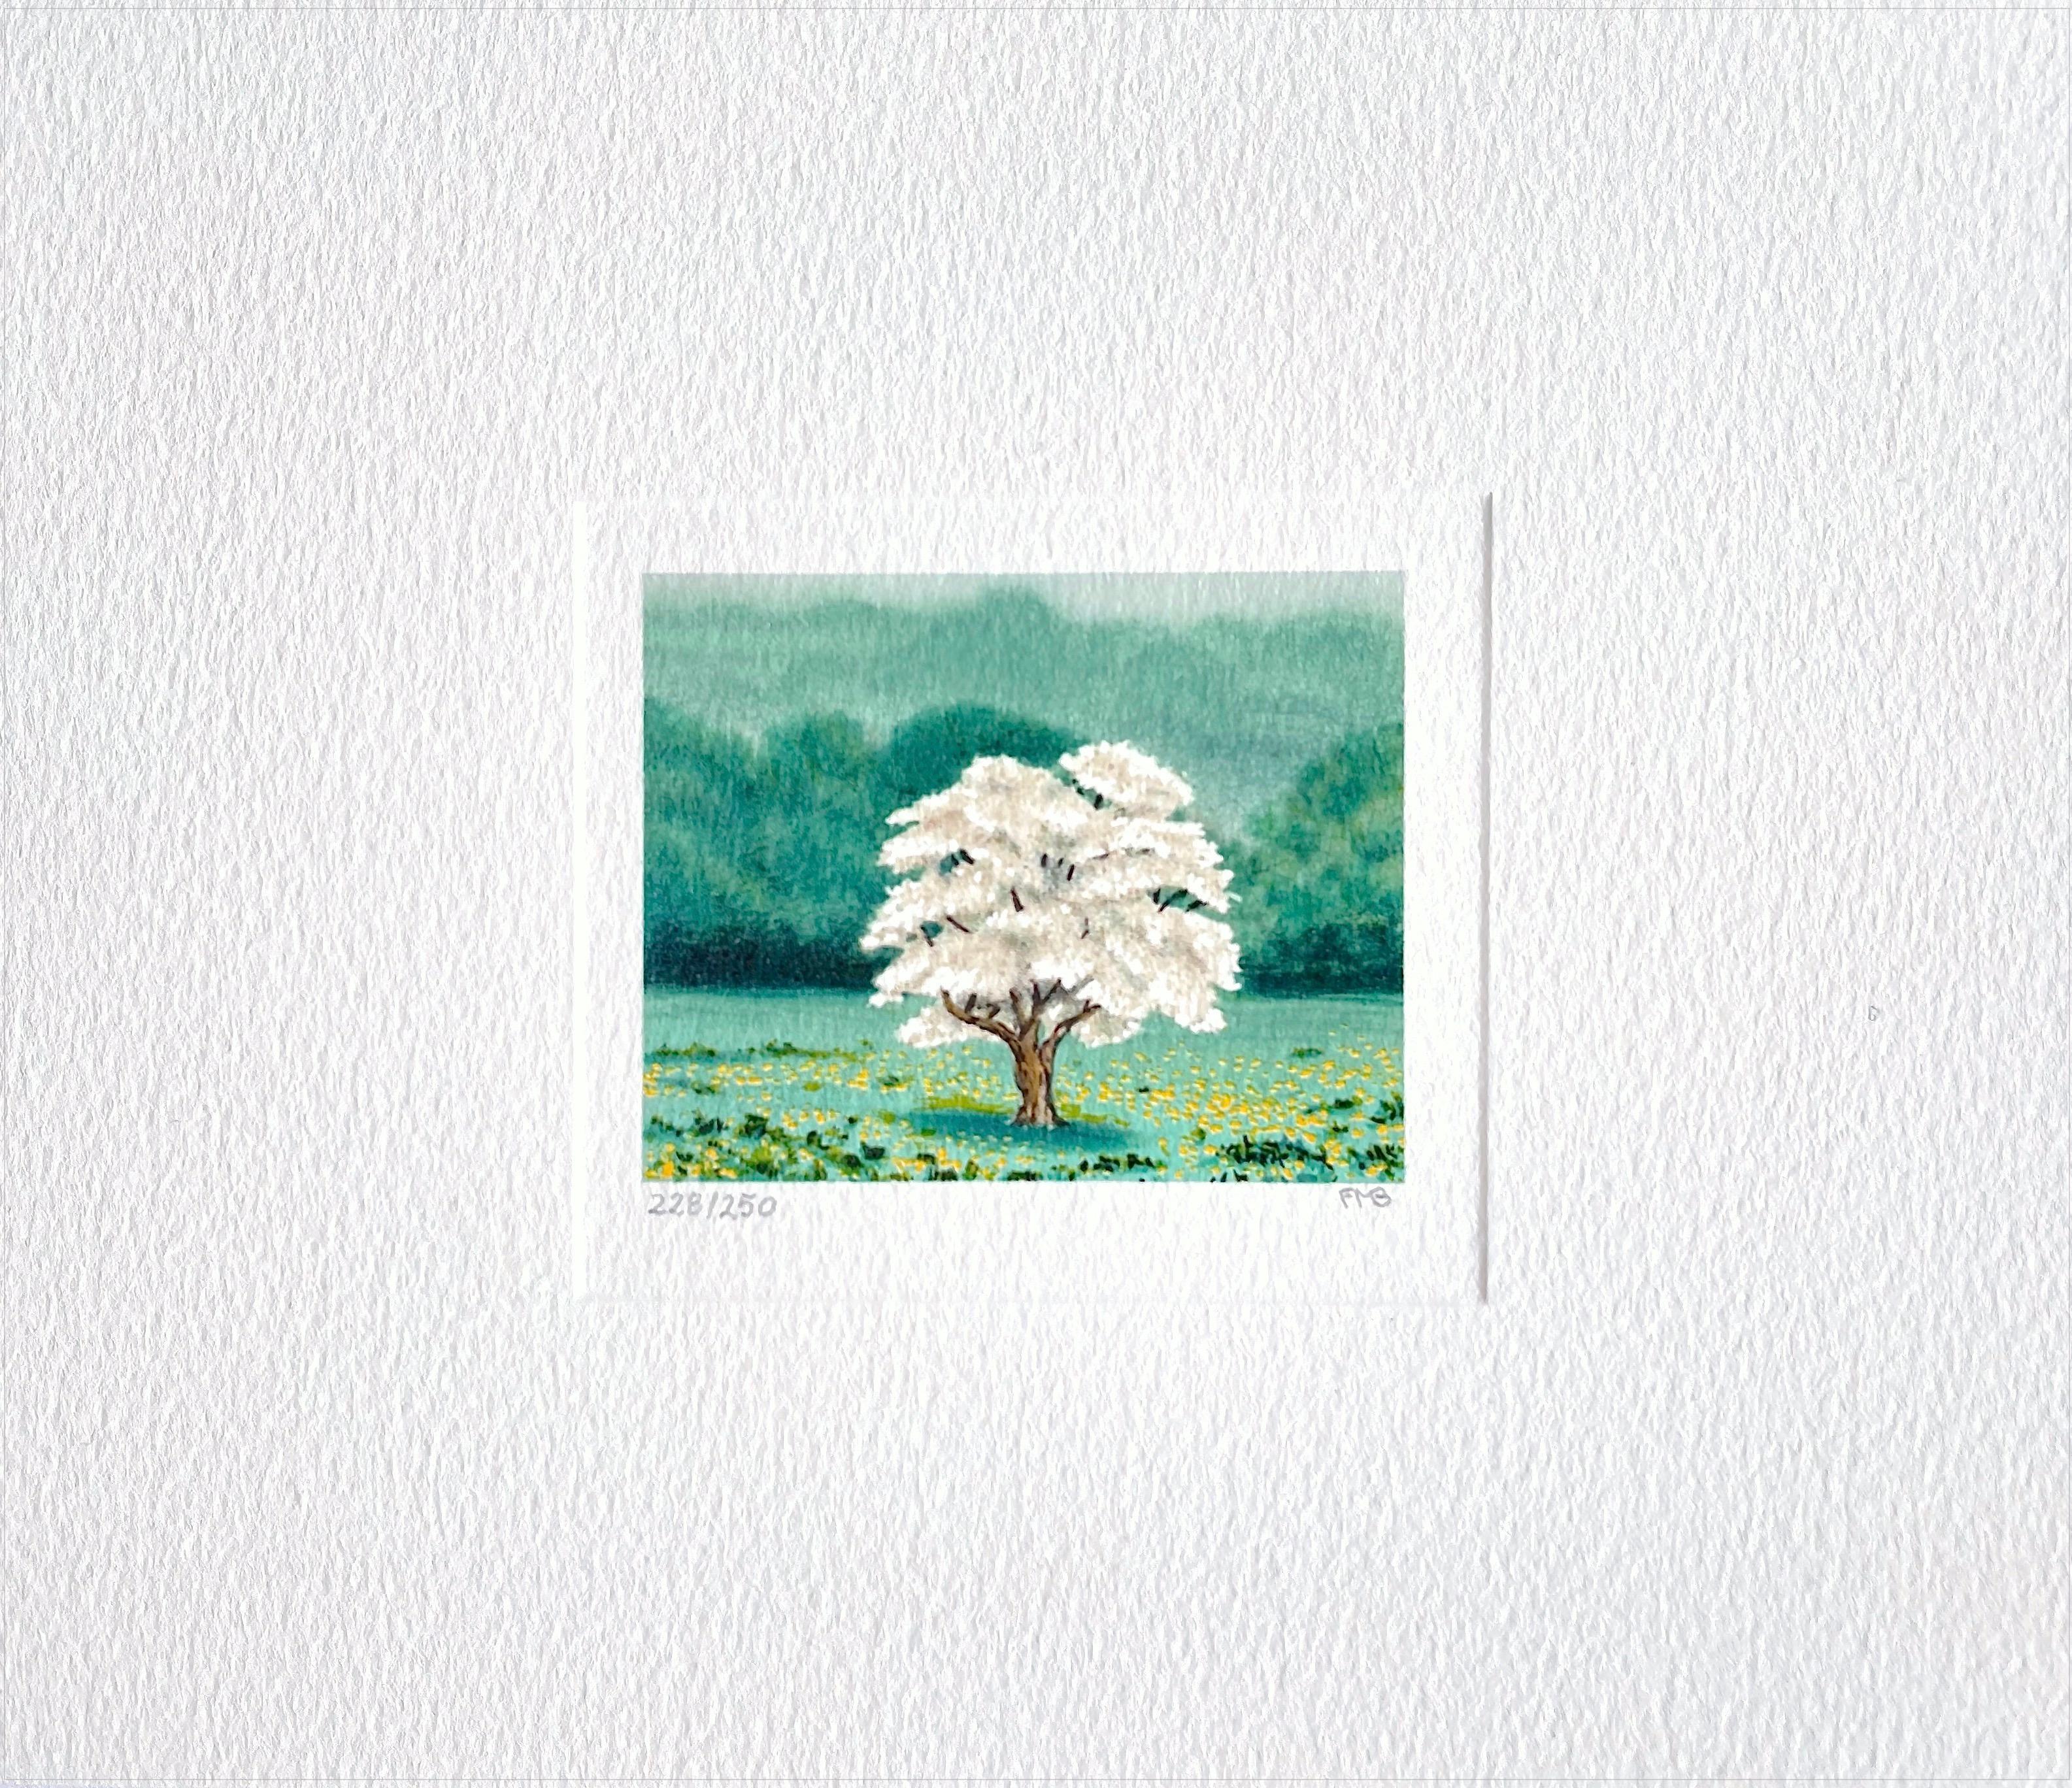 SOLO Signed Lithograph, Mini Landscape, White Tree, Green Grass, Yellow Flowers - Print by Fanny Brennan